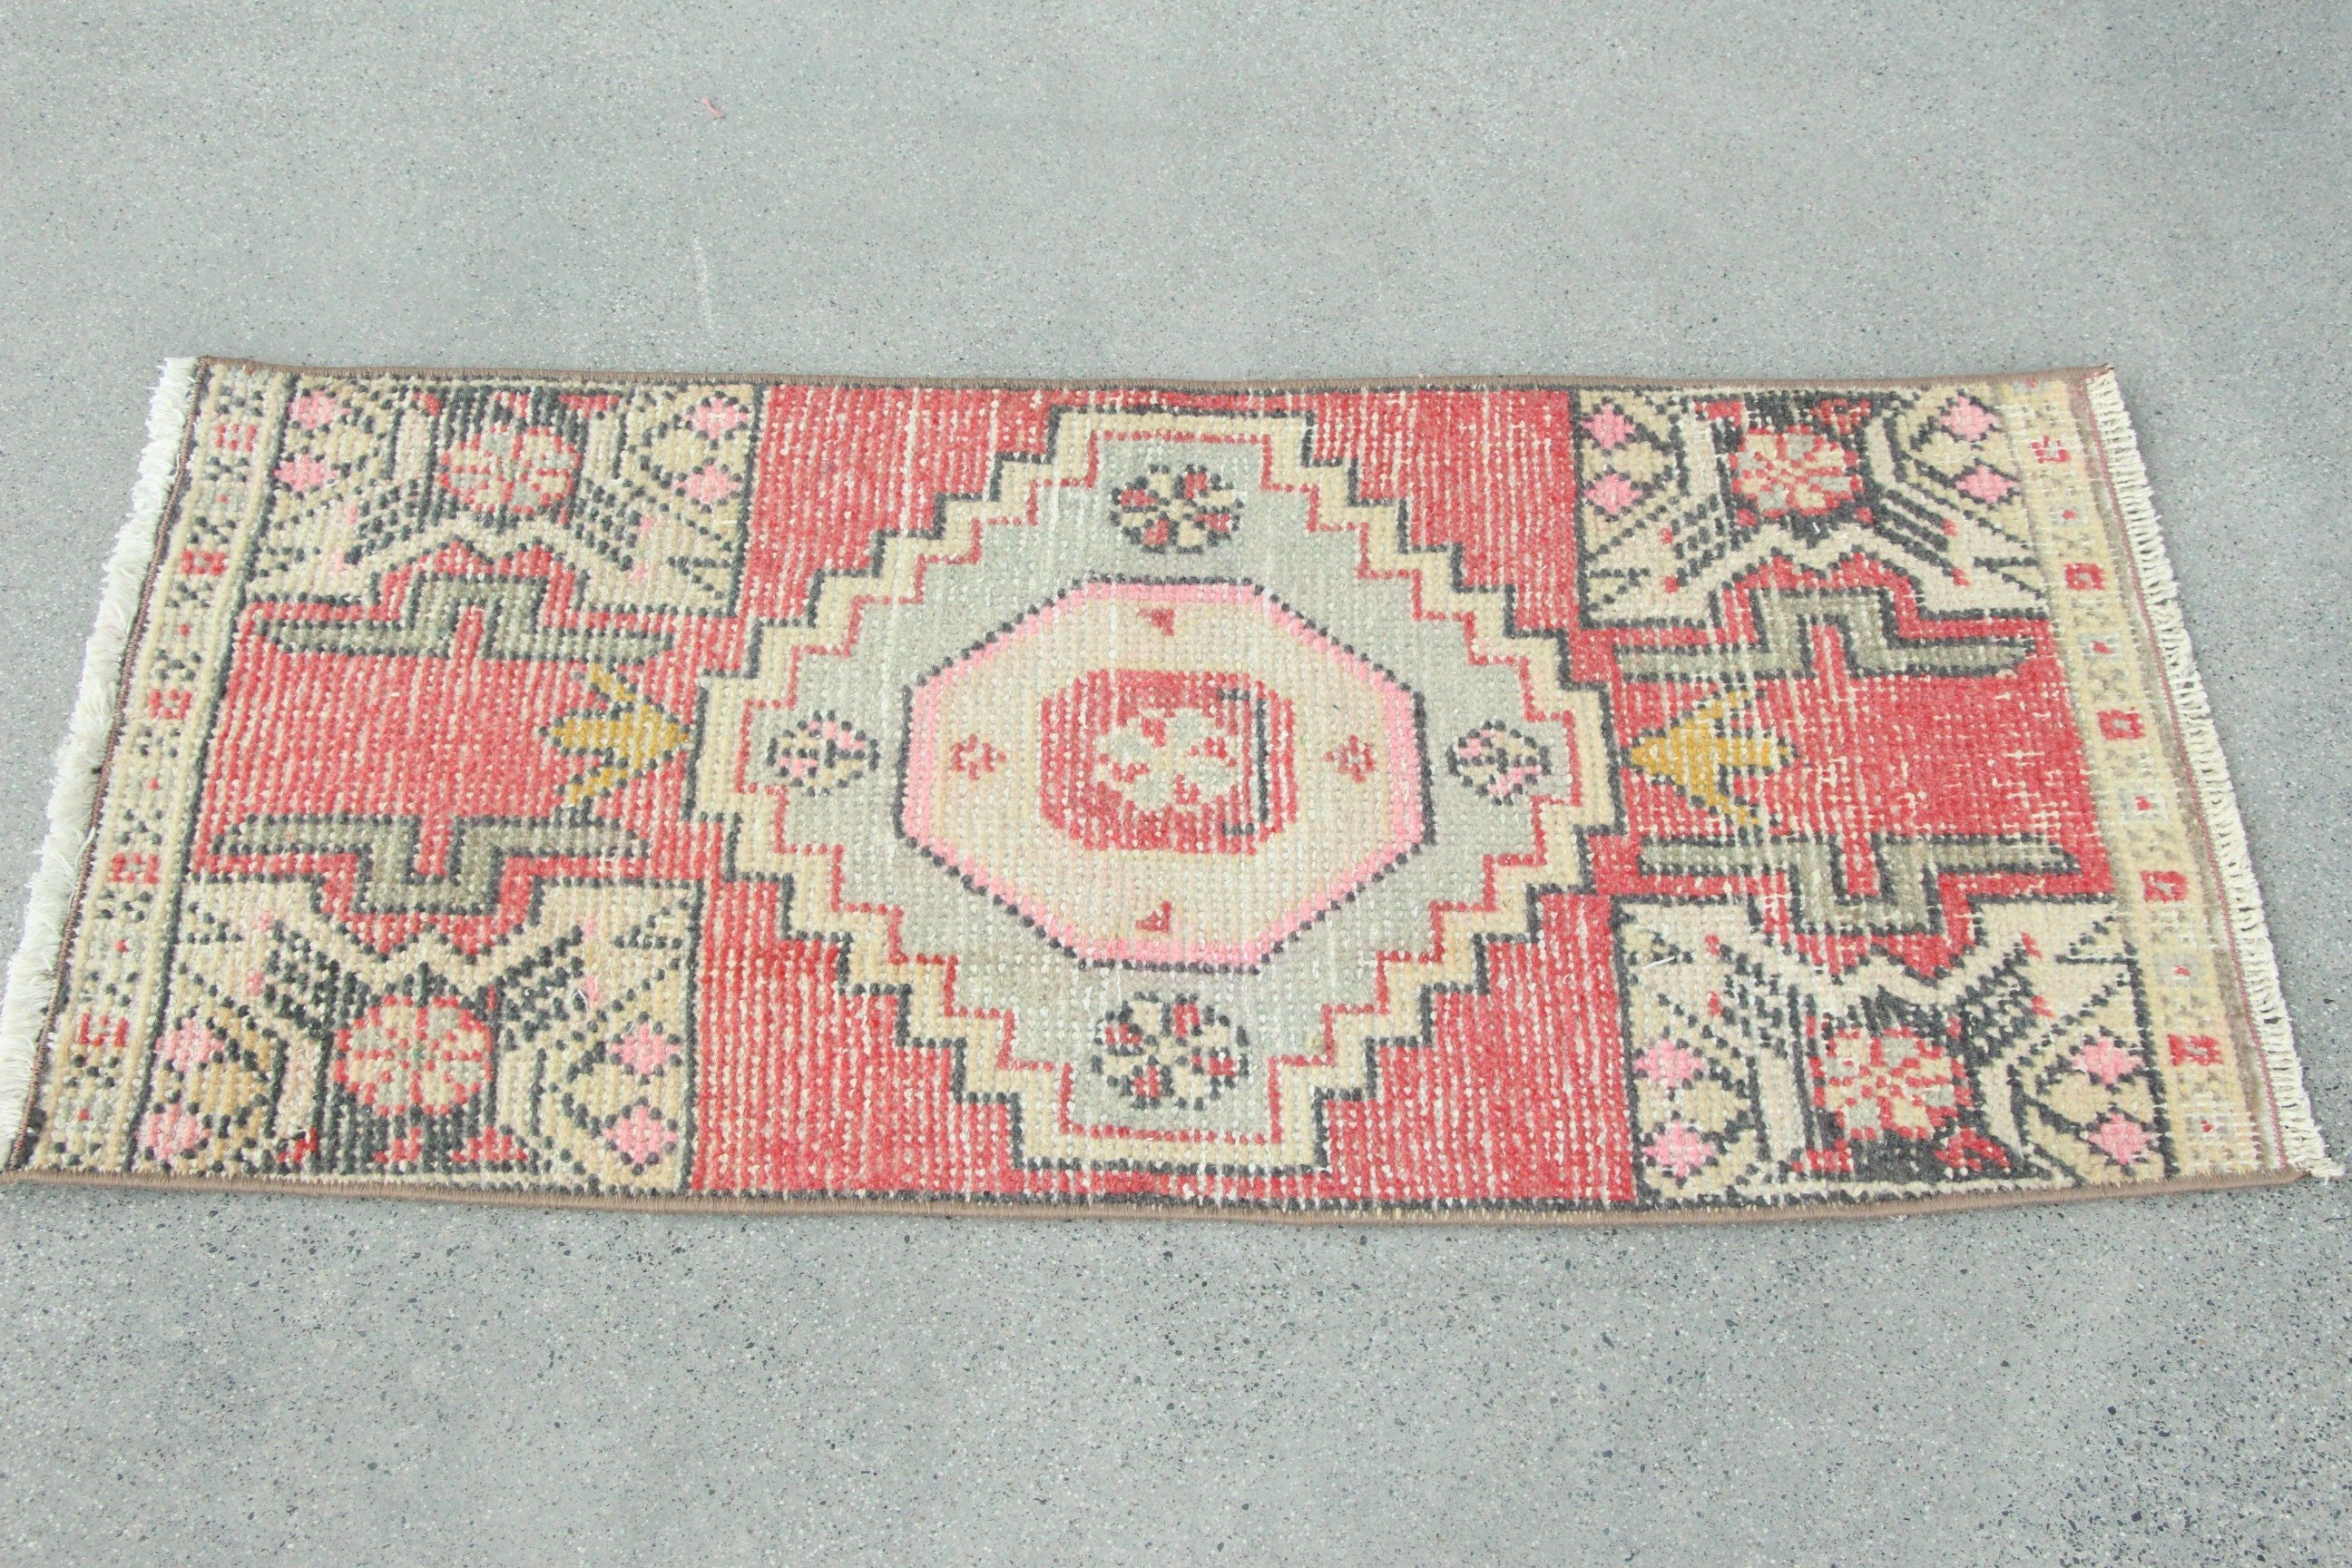 Vintage Rugs, Entry Rug, Cool Rugs, Art Rug, Turkish Rug, Red  1.5x3.1 ft Small Rugs, Oushak Rug, Car Mat Rug, Rugs for Bath